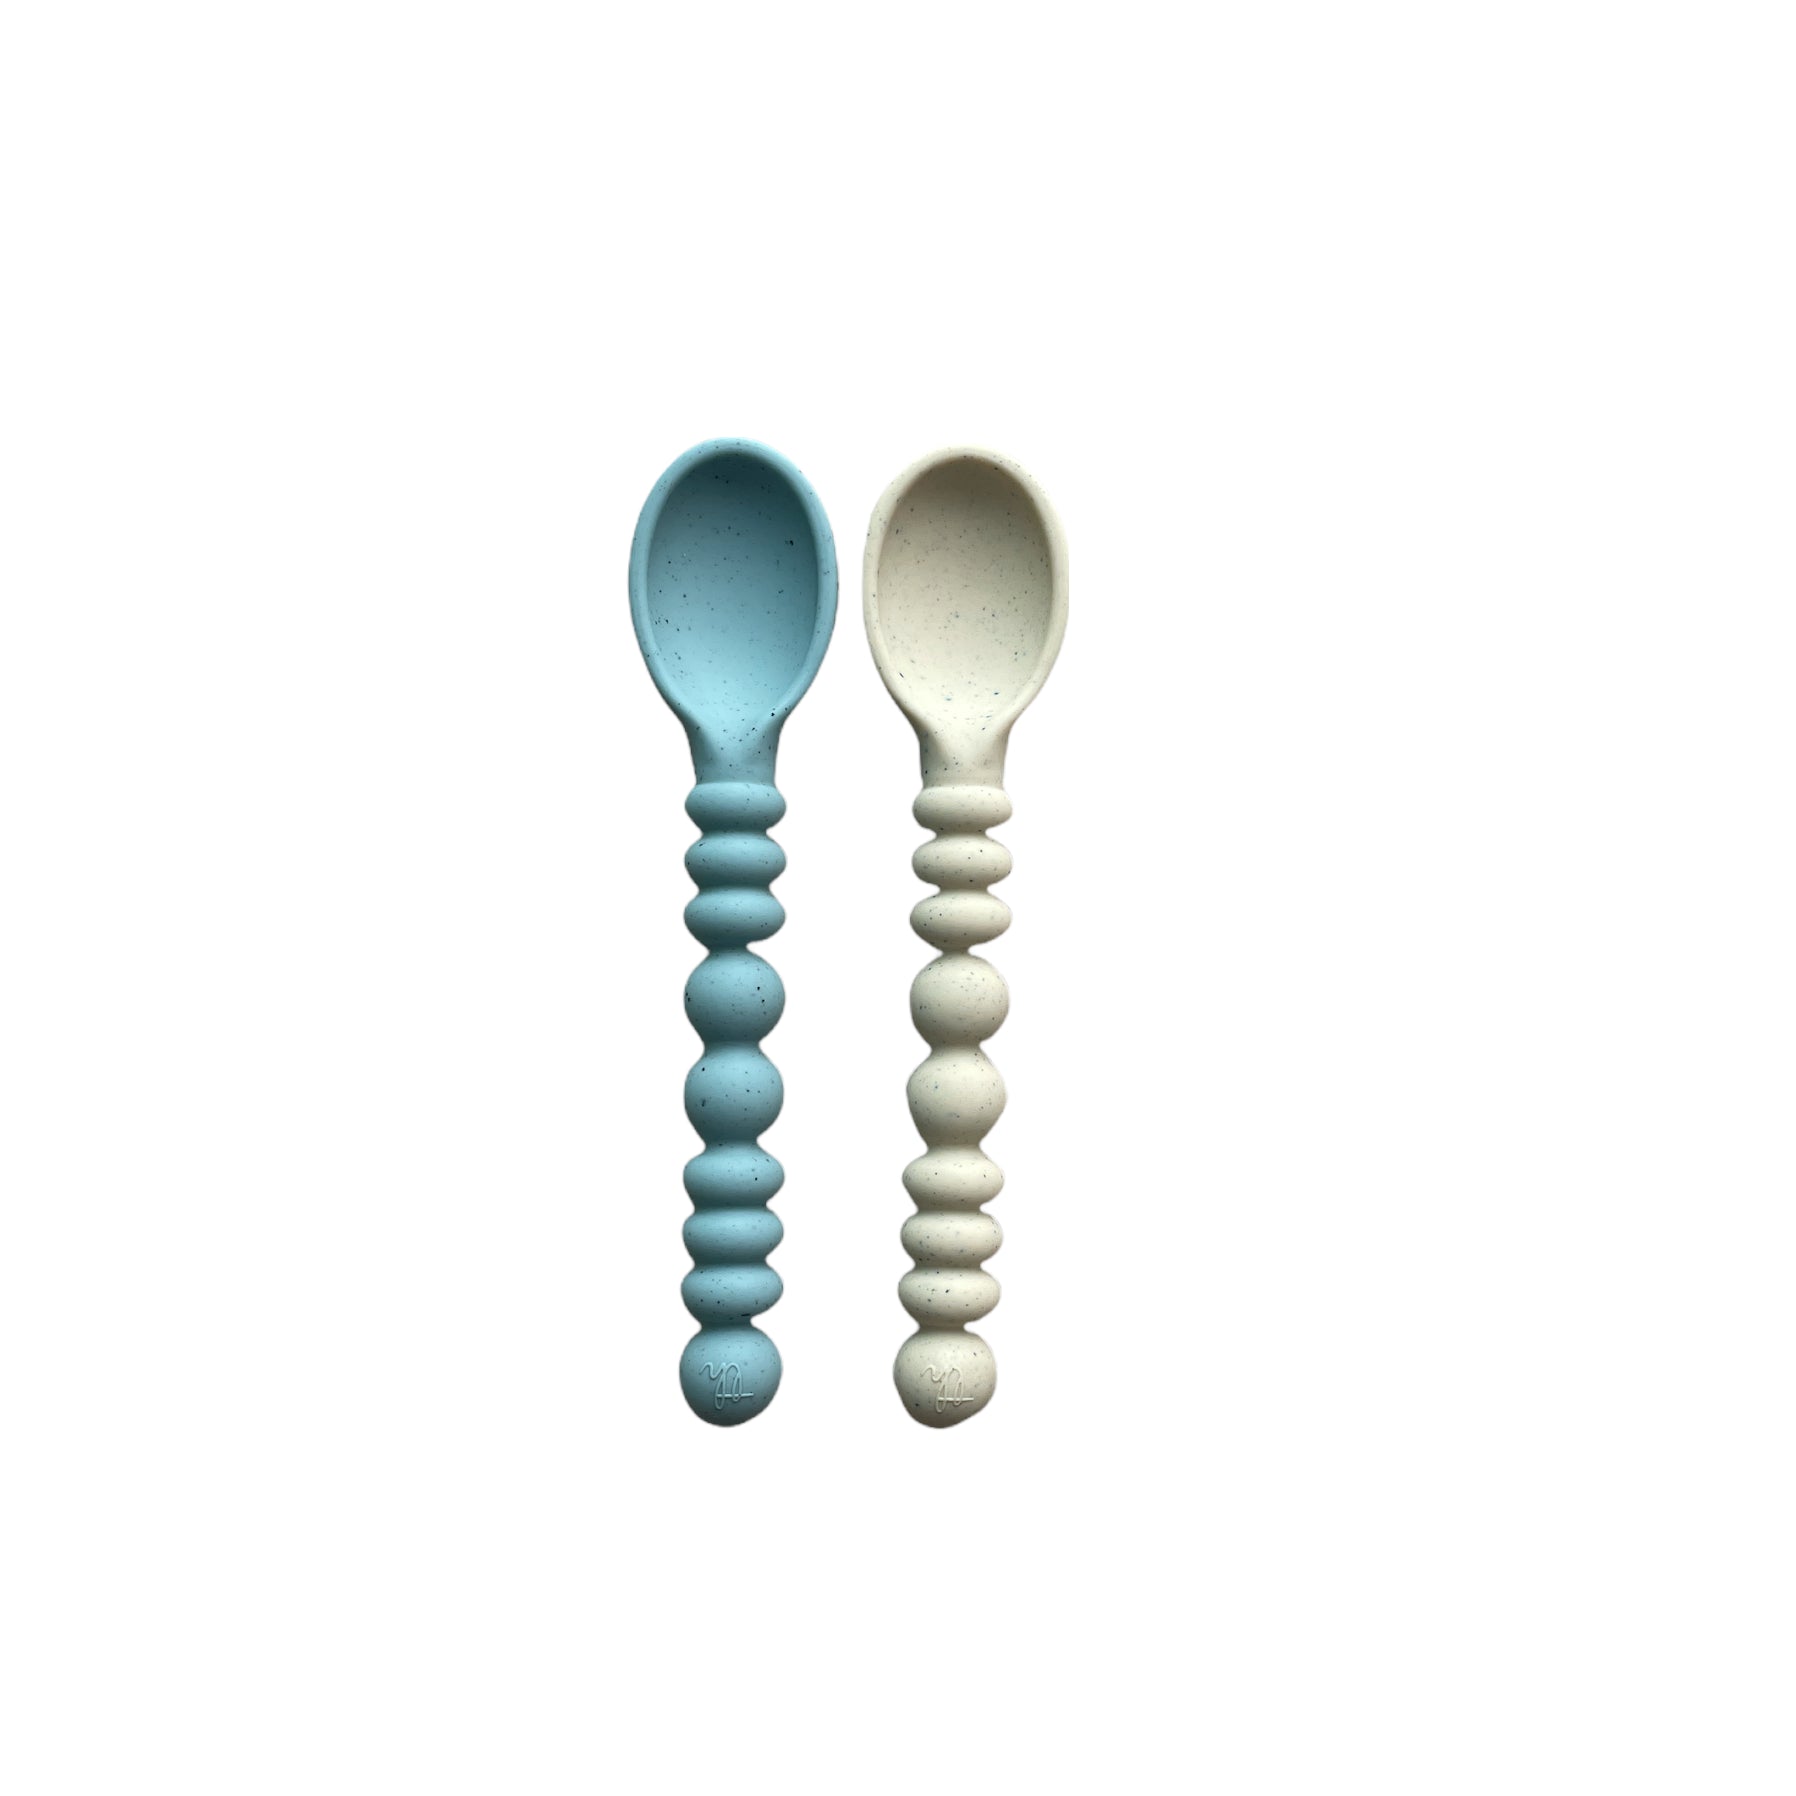 Silicone baby spoon set, High Noon General Store